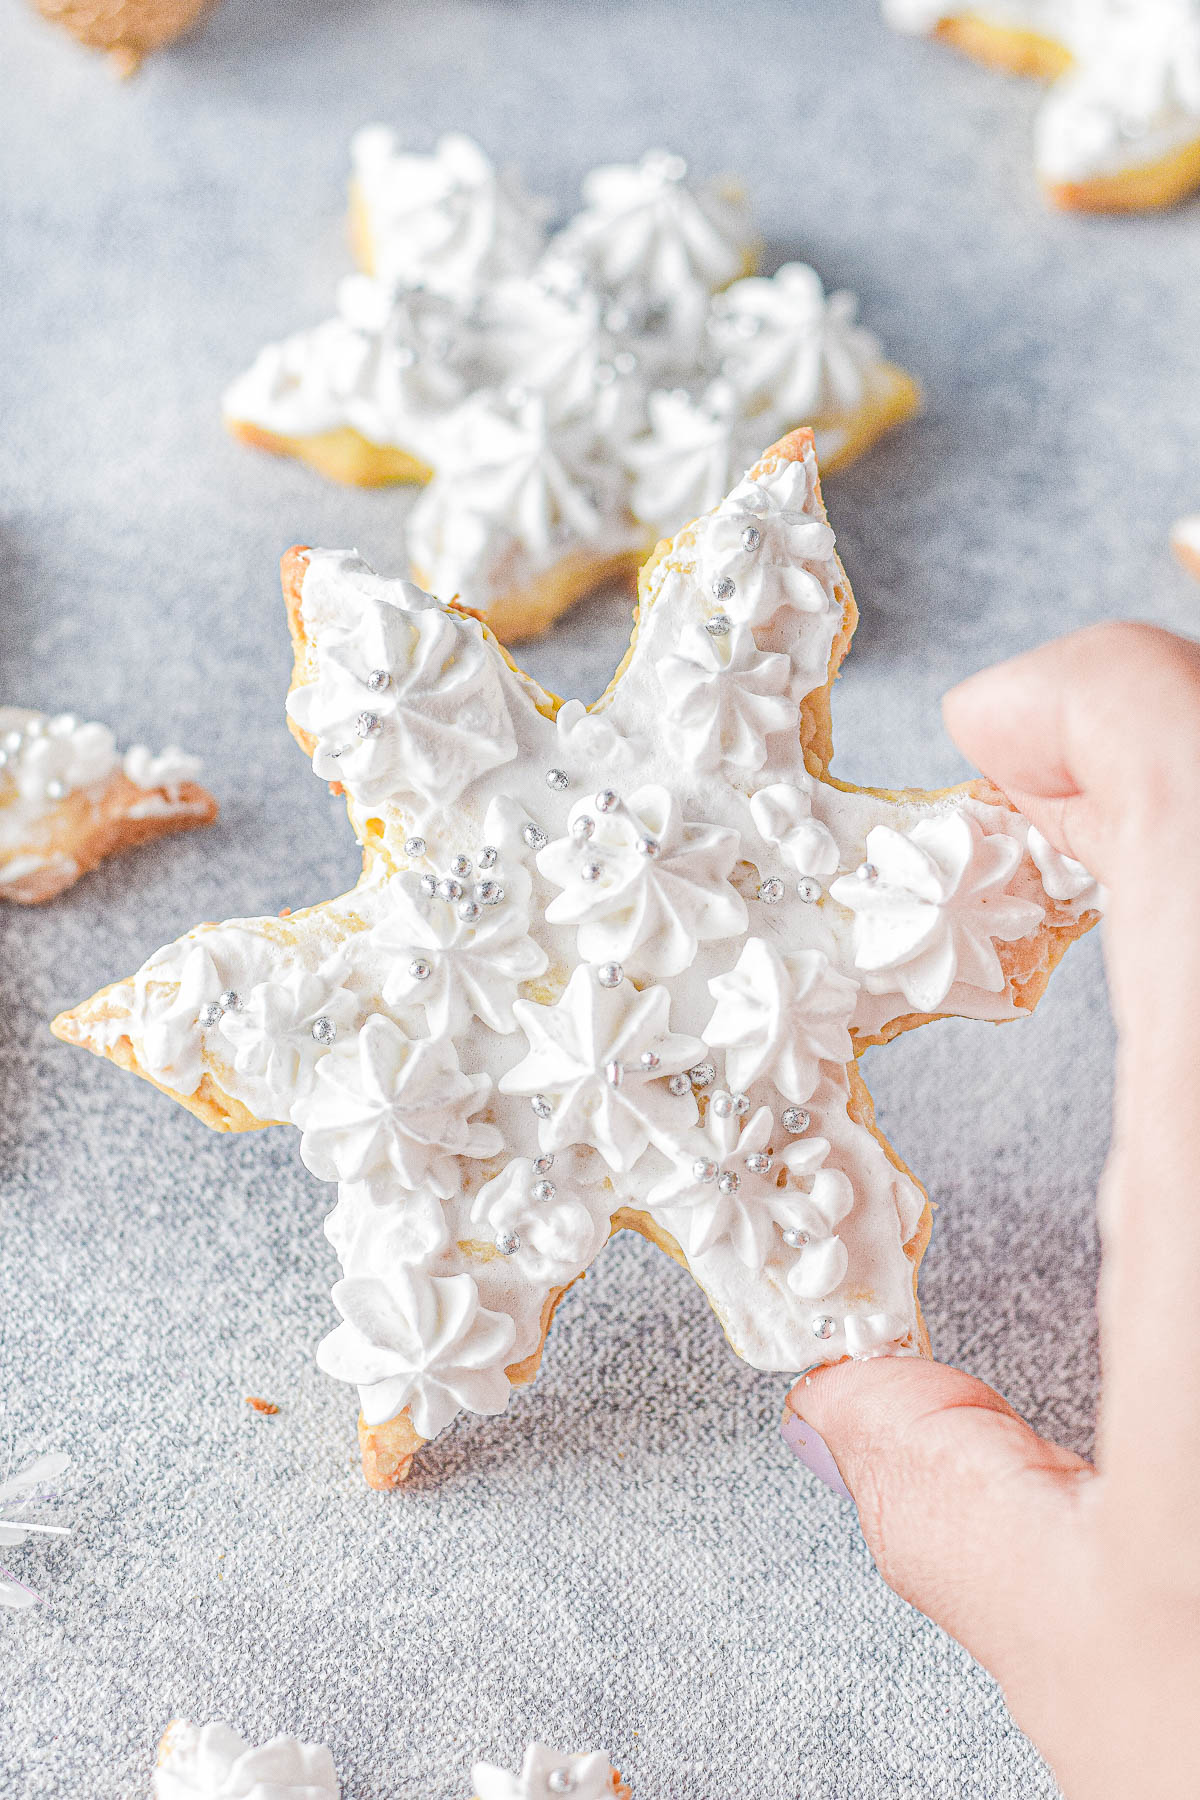 Frosted Snowflake Sugar Cookies - Classic sugar cookies that are heavenly sweet, soft, and all dressed up with piped vanilla frosting and sprinkles! They're always the biggest hit at Christmas parties and cookie exchanges! Easy enough for novice bakers thanks to my straightforward directions which set you up for PERFECT Christmas cookies!